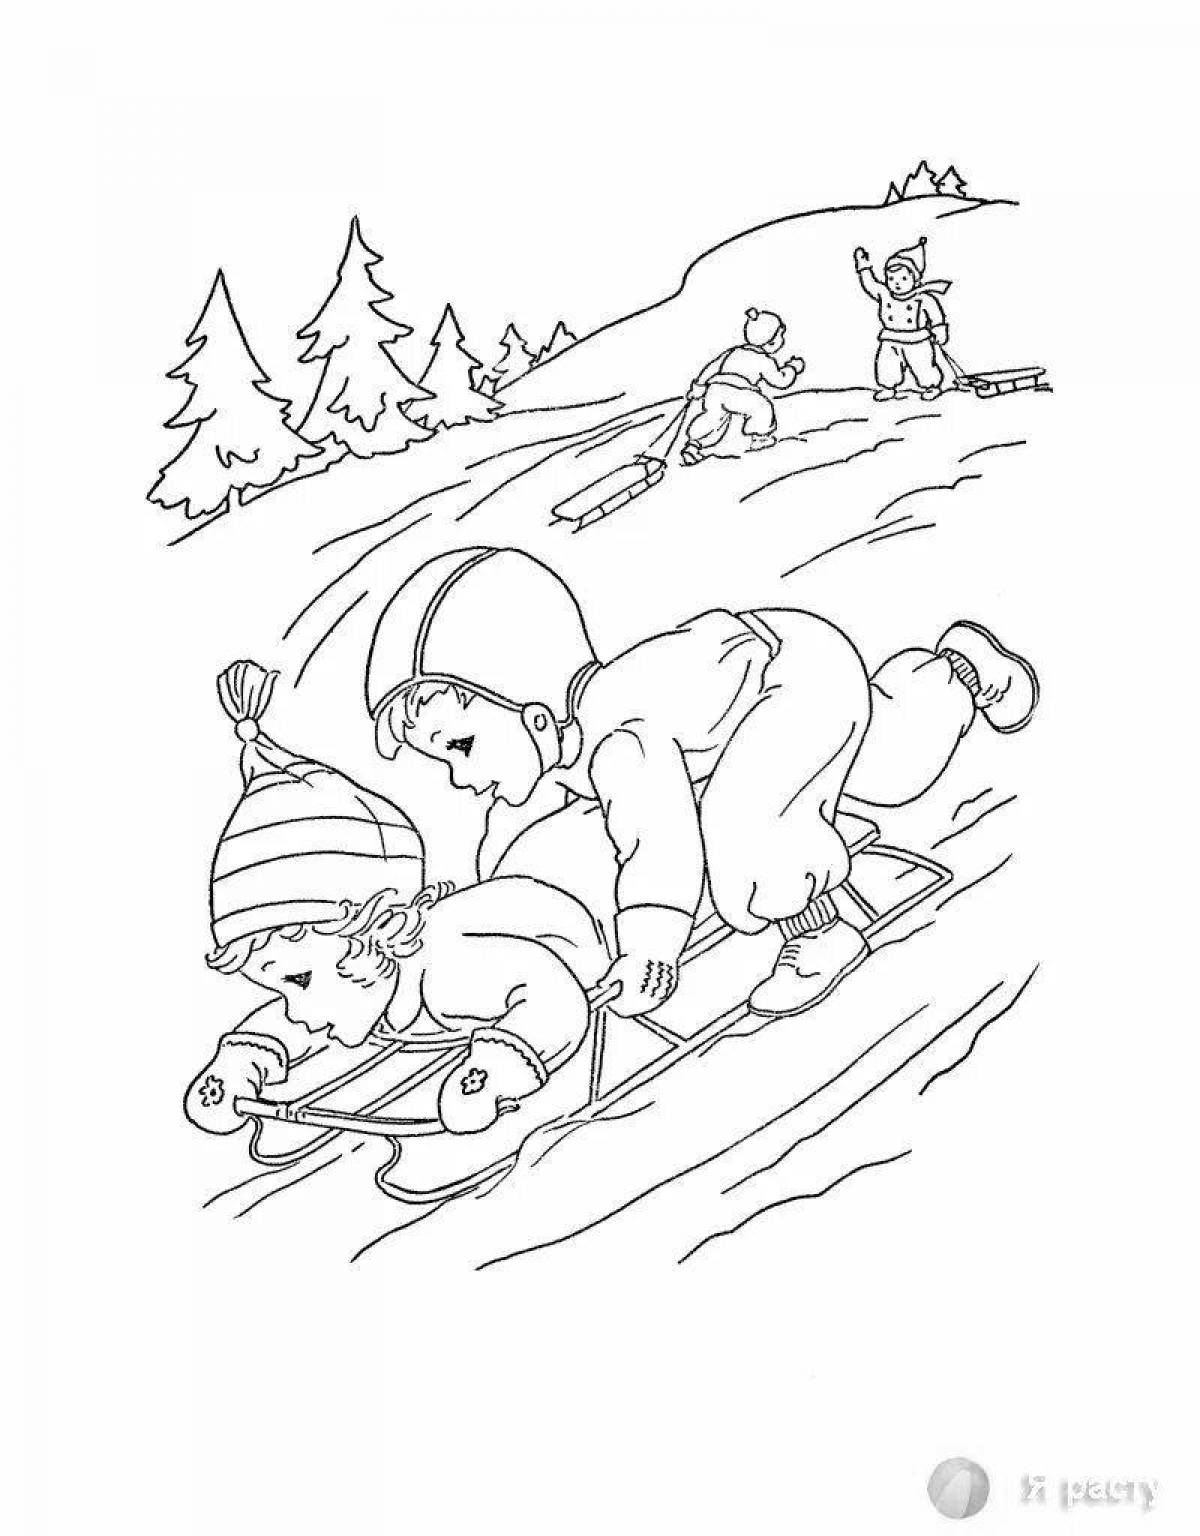 Fun winter safety coloring book for preschoolers